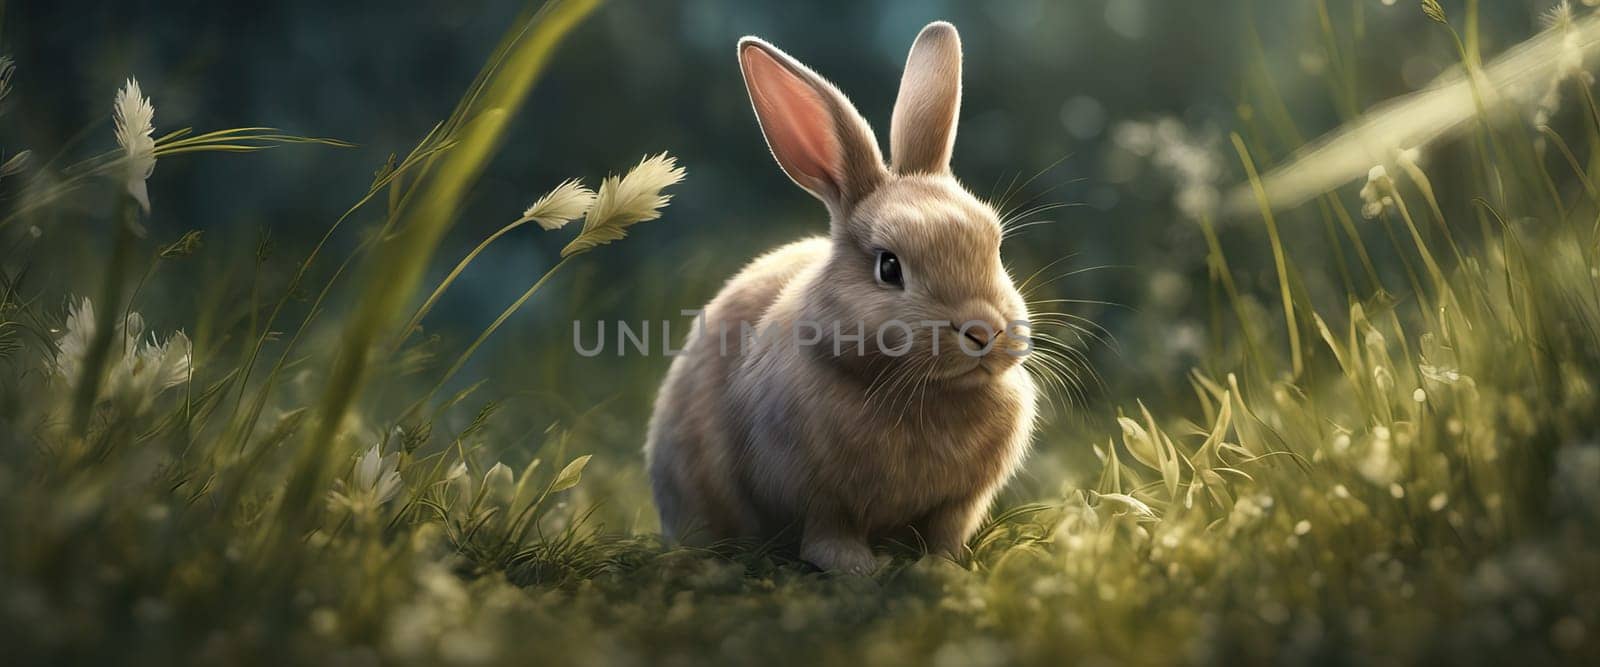 Happy Easter Bunny on a card on their with flowers at sunset. Cute hare